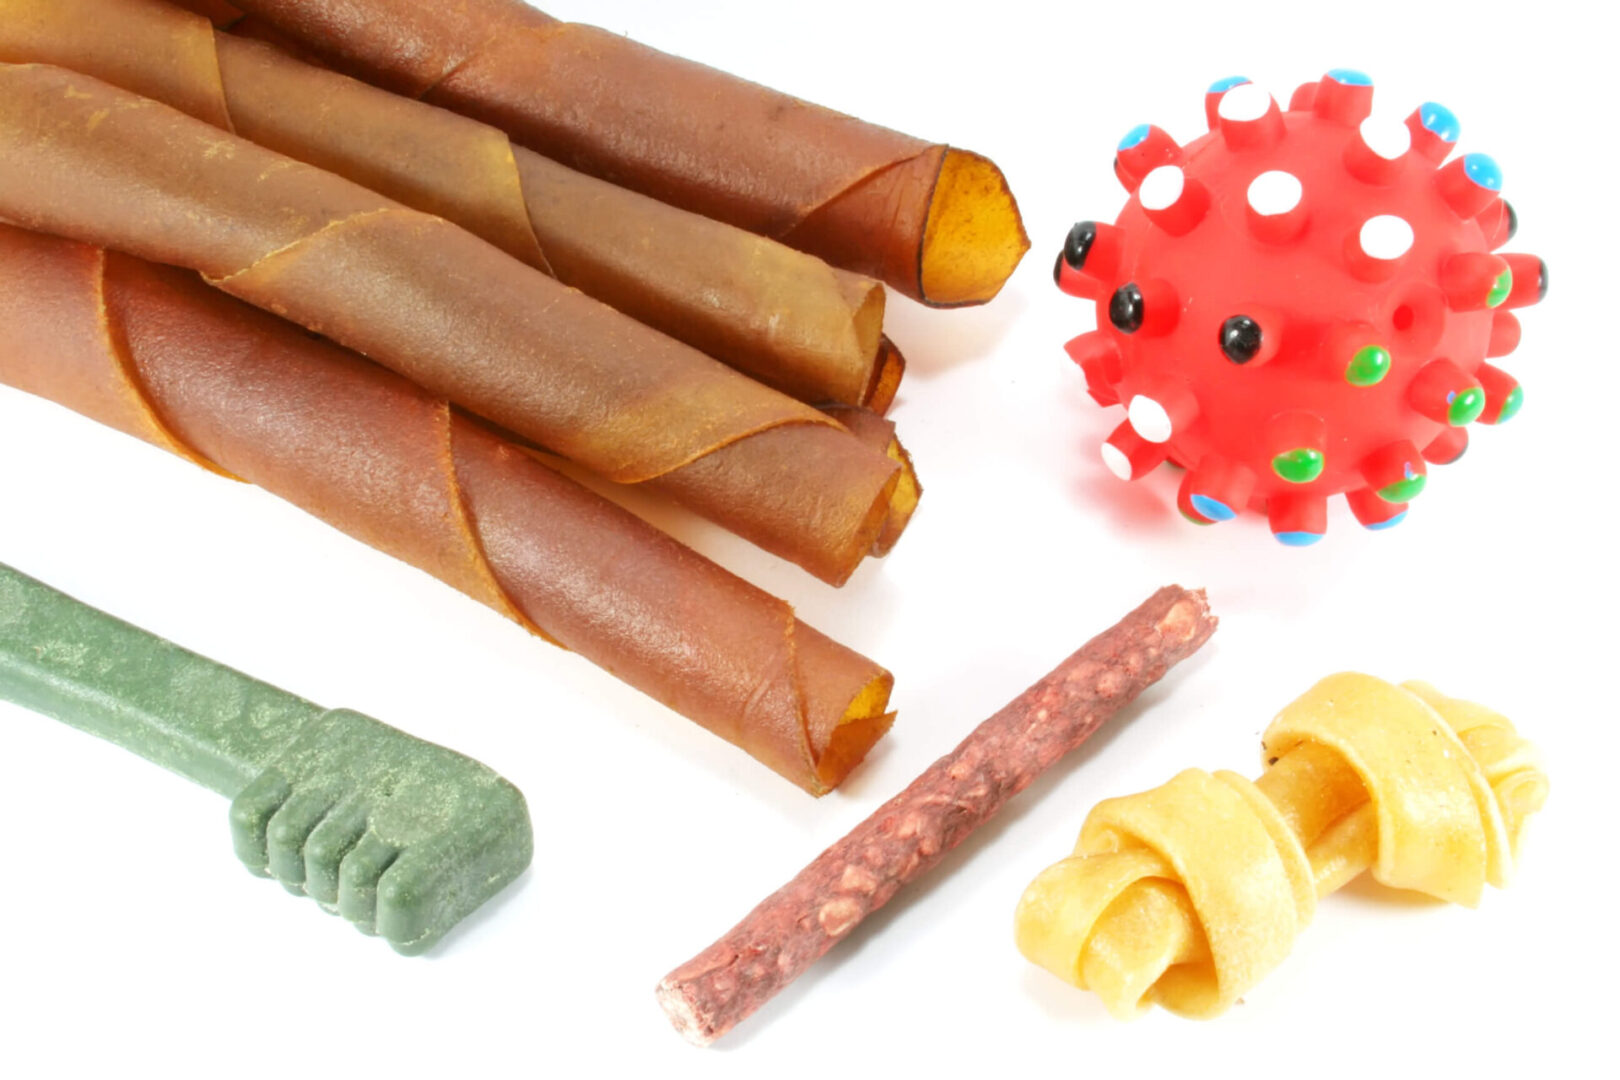 A variety of dog treats and toys on a white background.